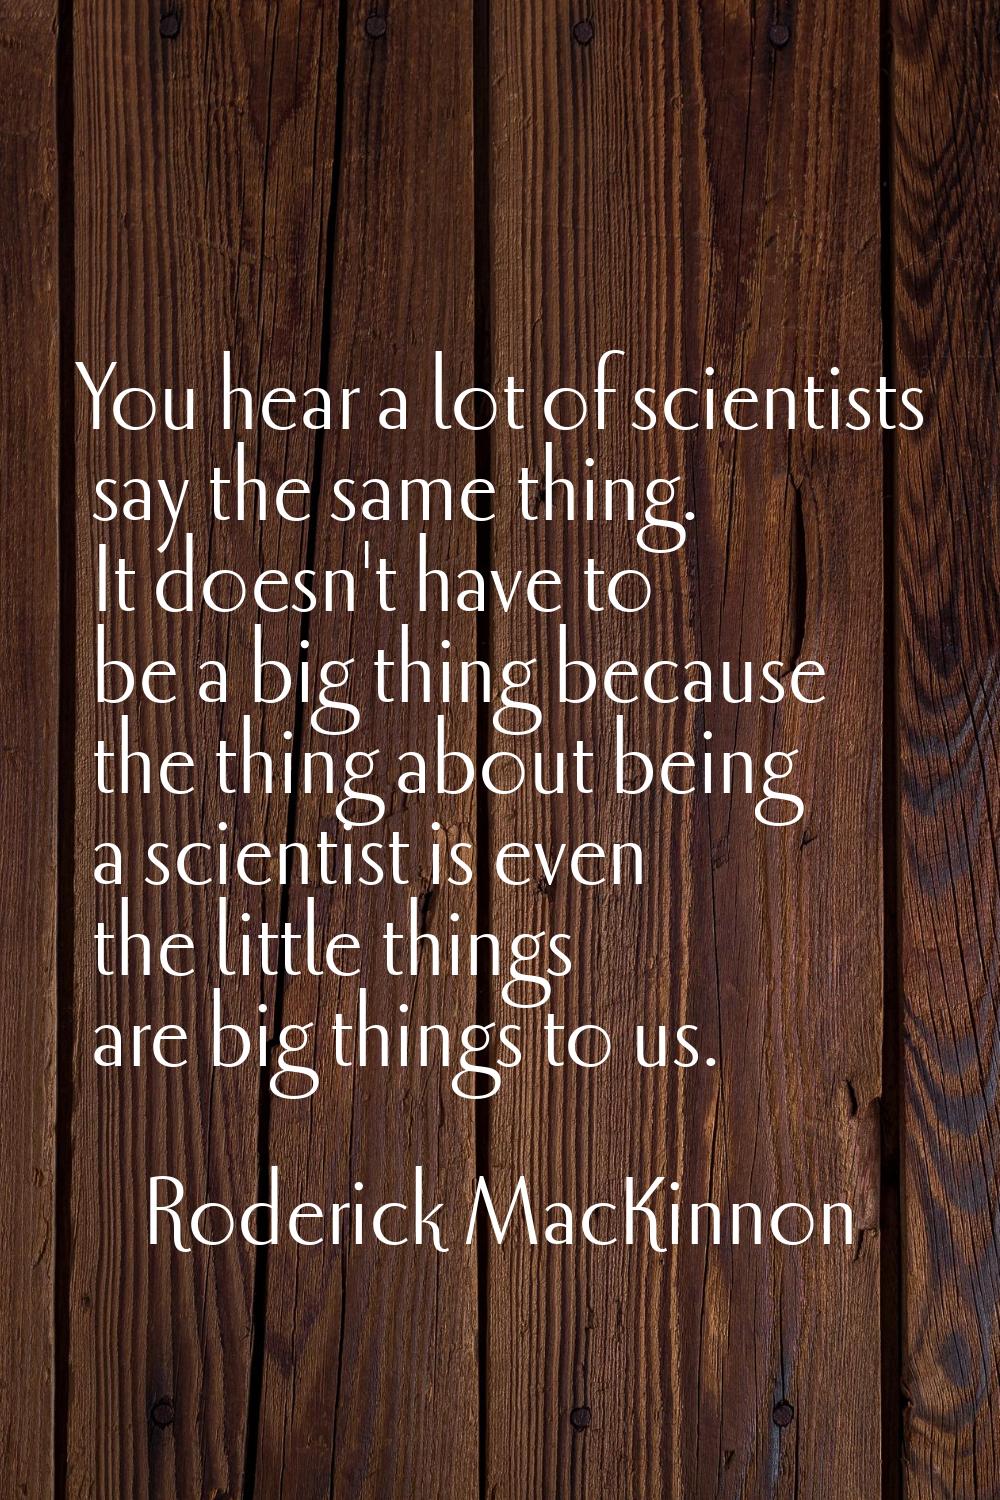 You hear a lot of scientists say the same thing. It doesn't have to be a big thing because the thin